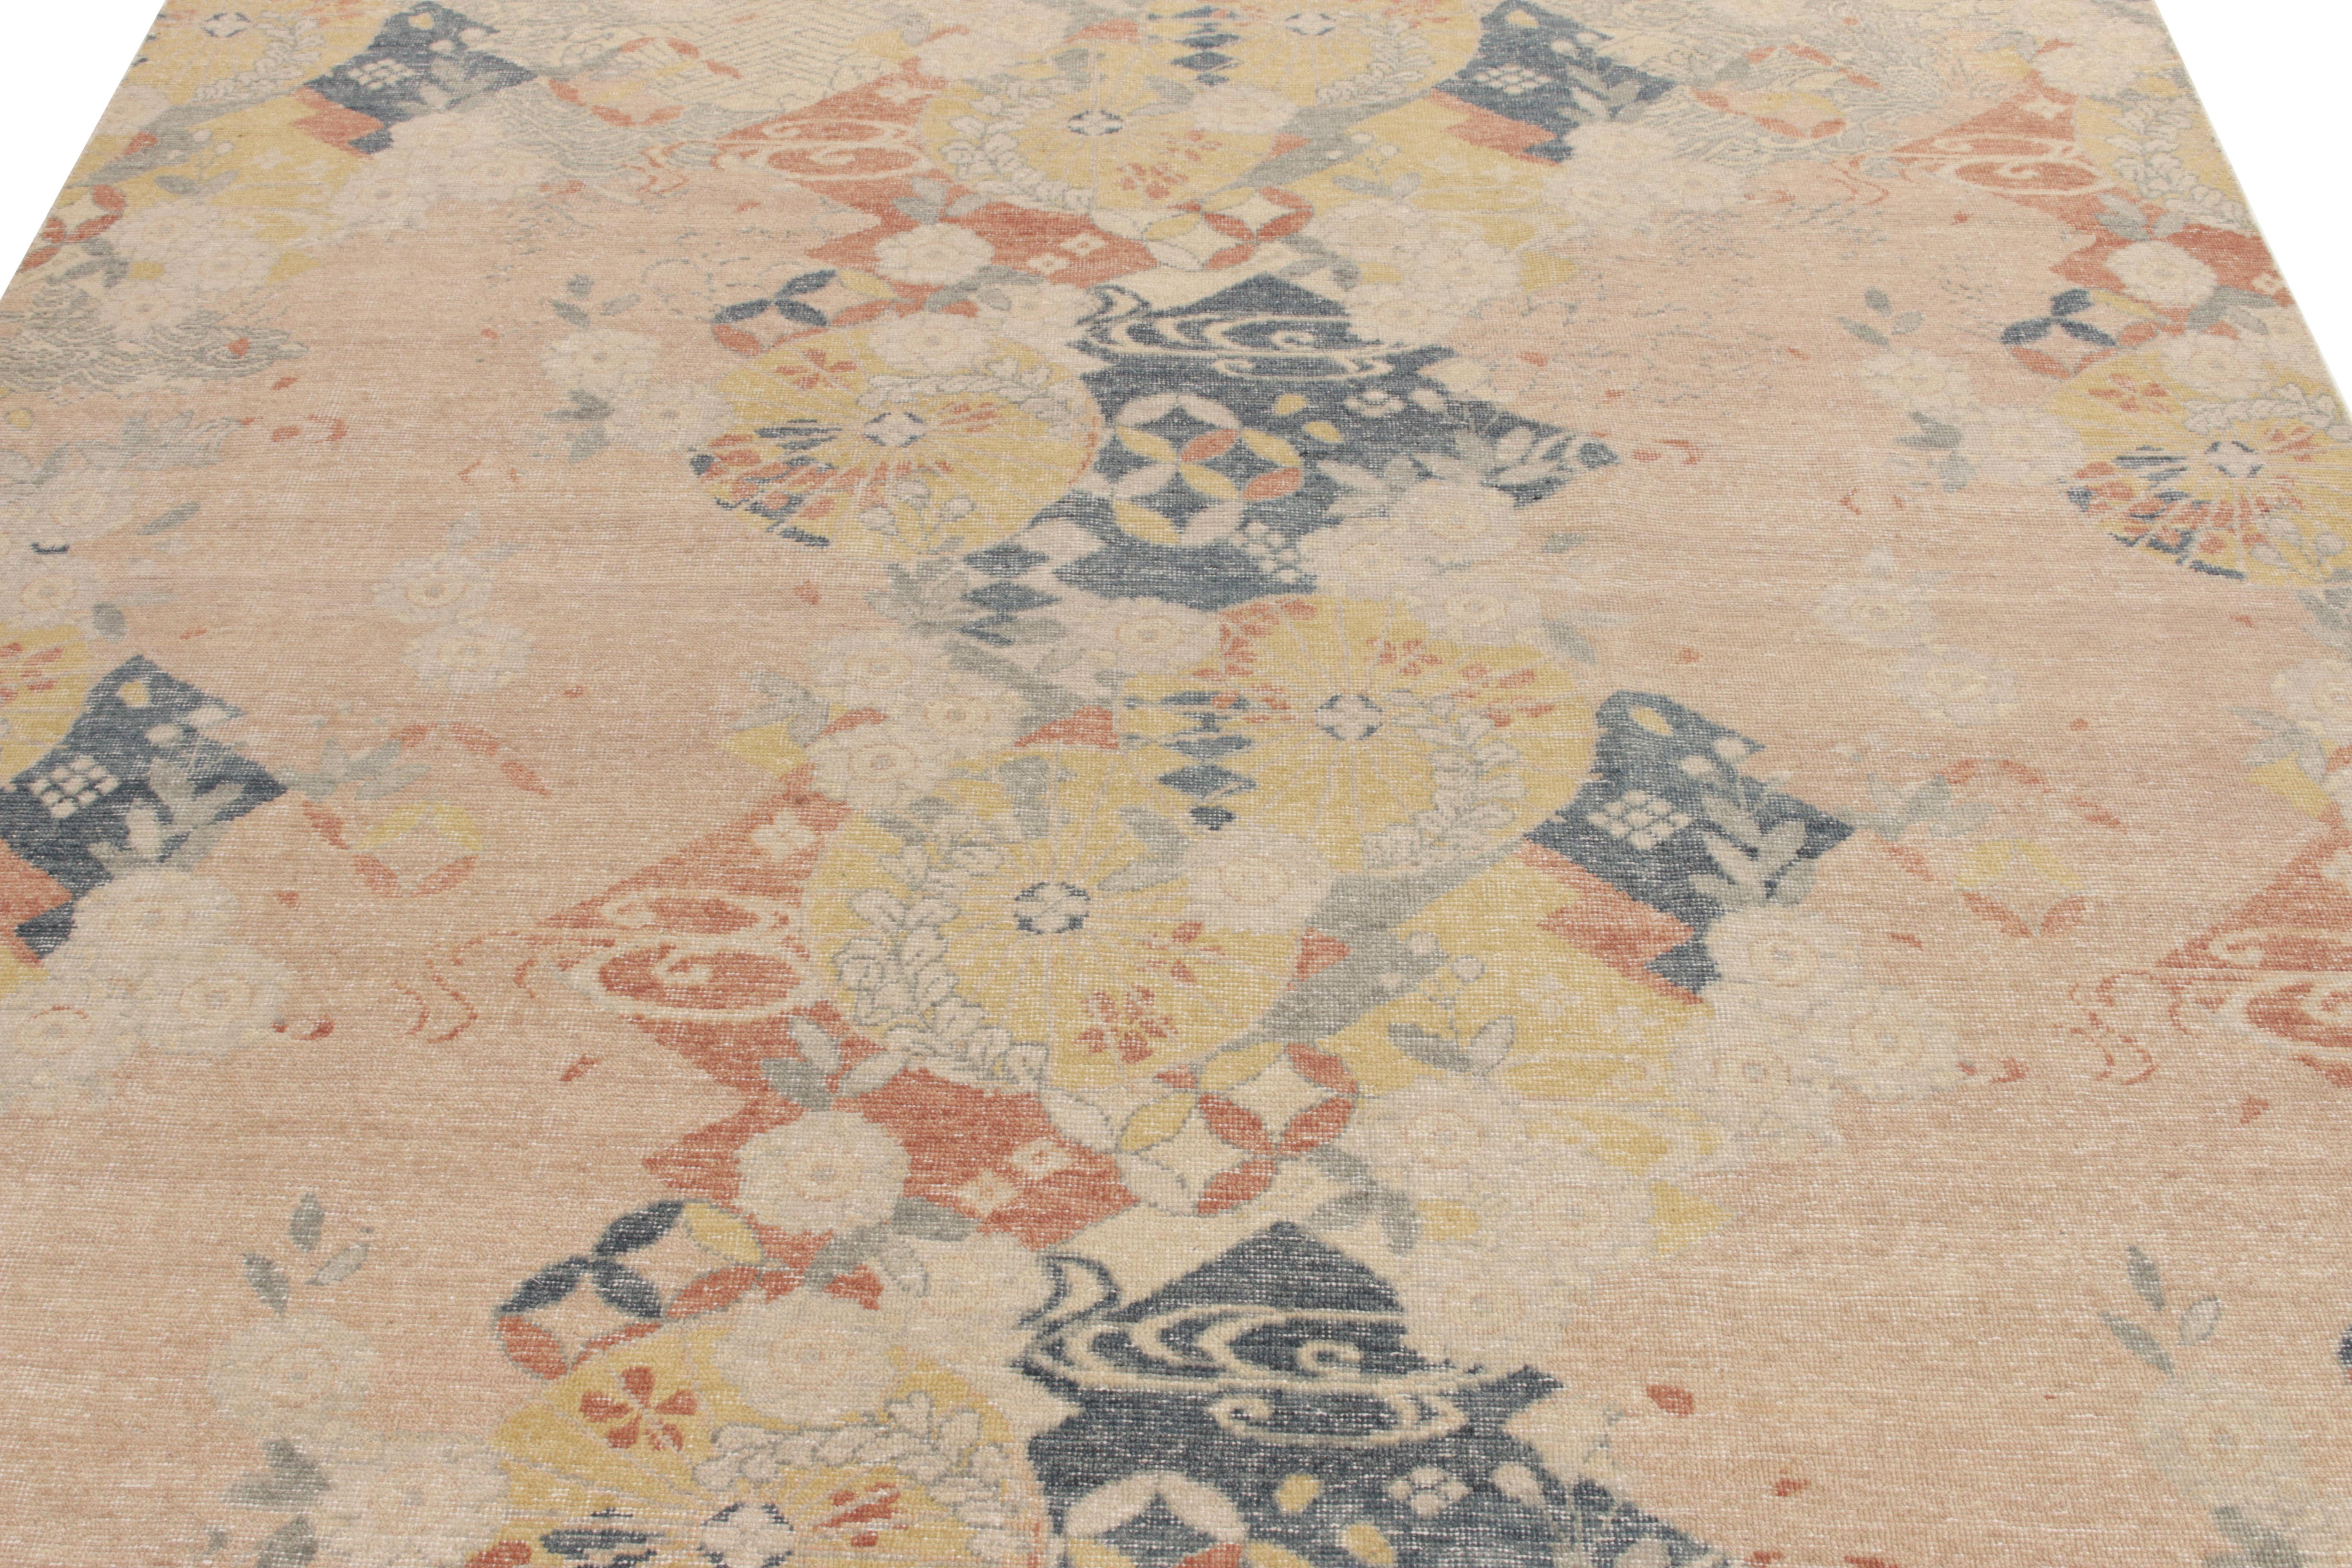 Rug & Kilim's Distressed Japanese Deco Style Teppich in Blau, Rosa All over Muster (Indisch) im Angebot